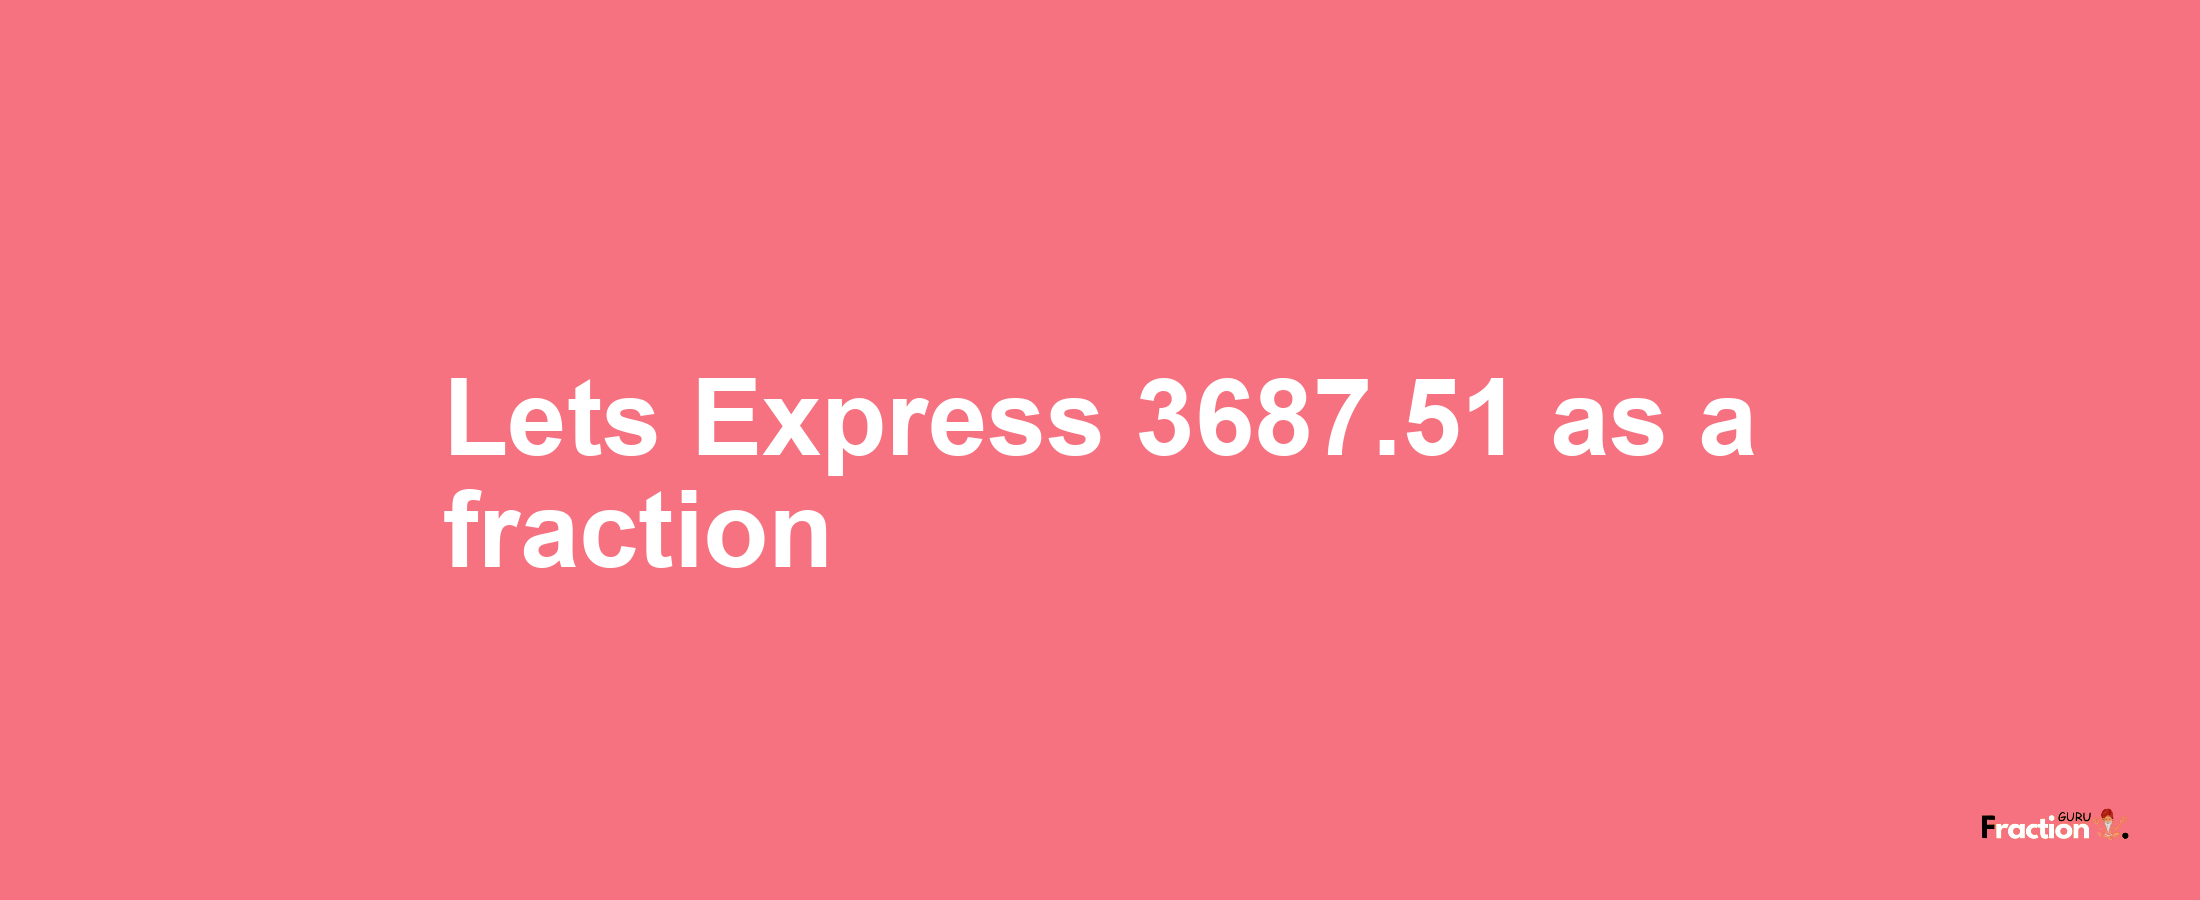 Lets Express 3687.51 as afraction